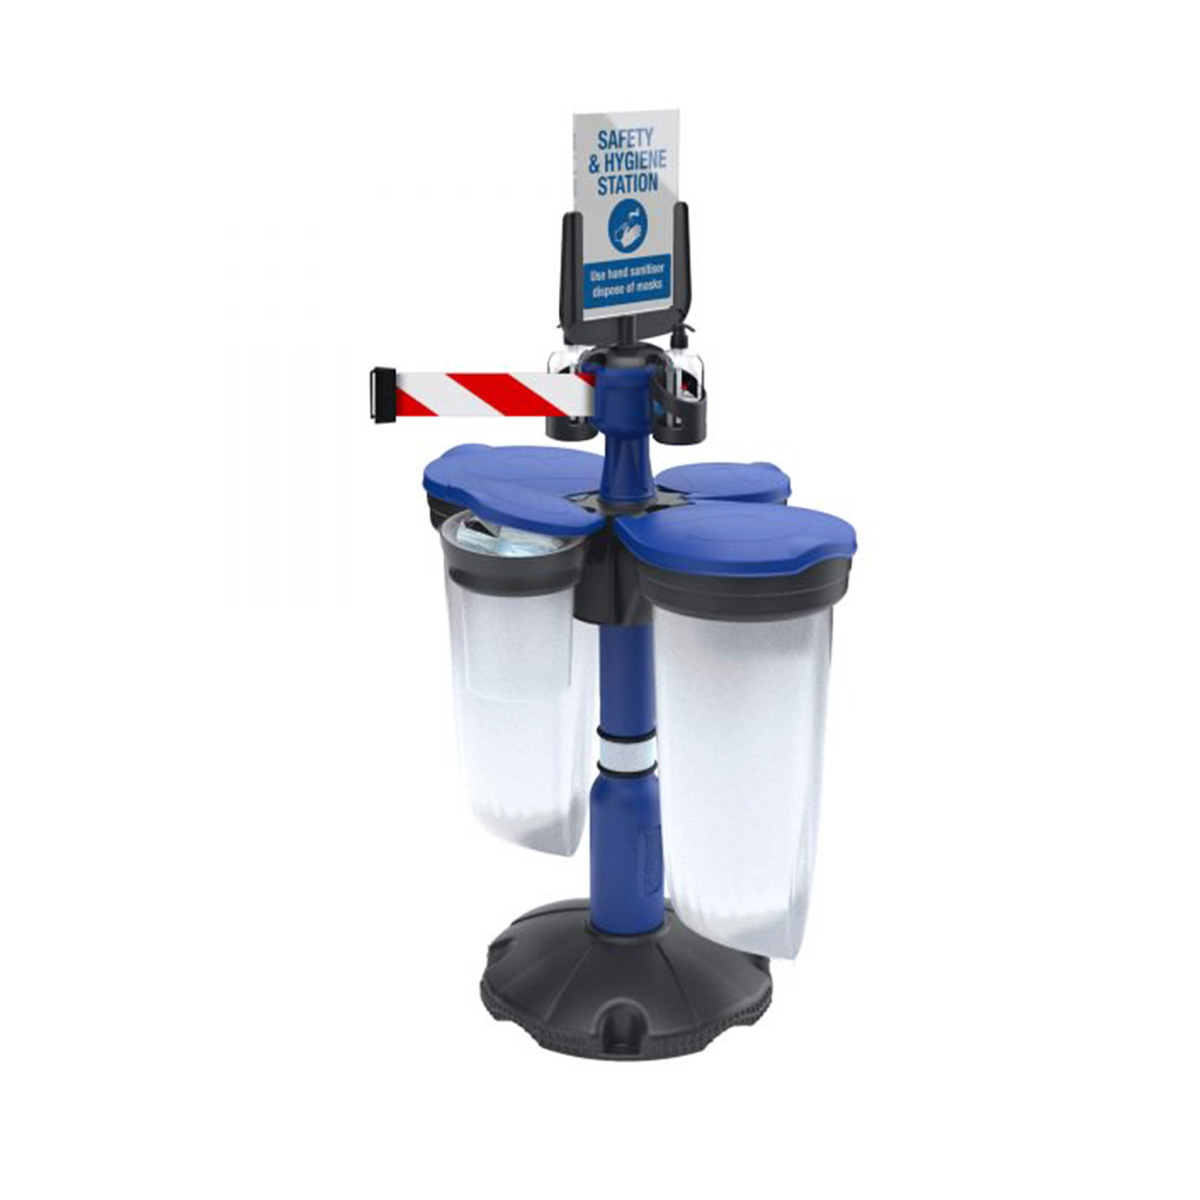 Skipper Retractable Belt And Safety Station 2 With Blue Stanchion